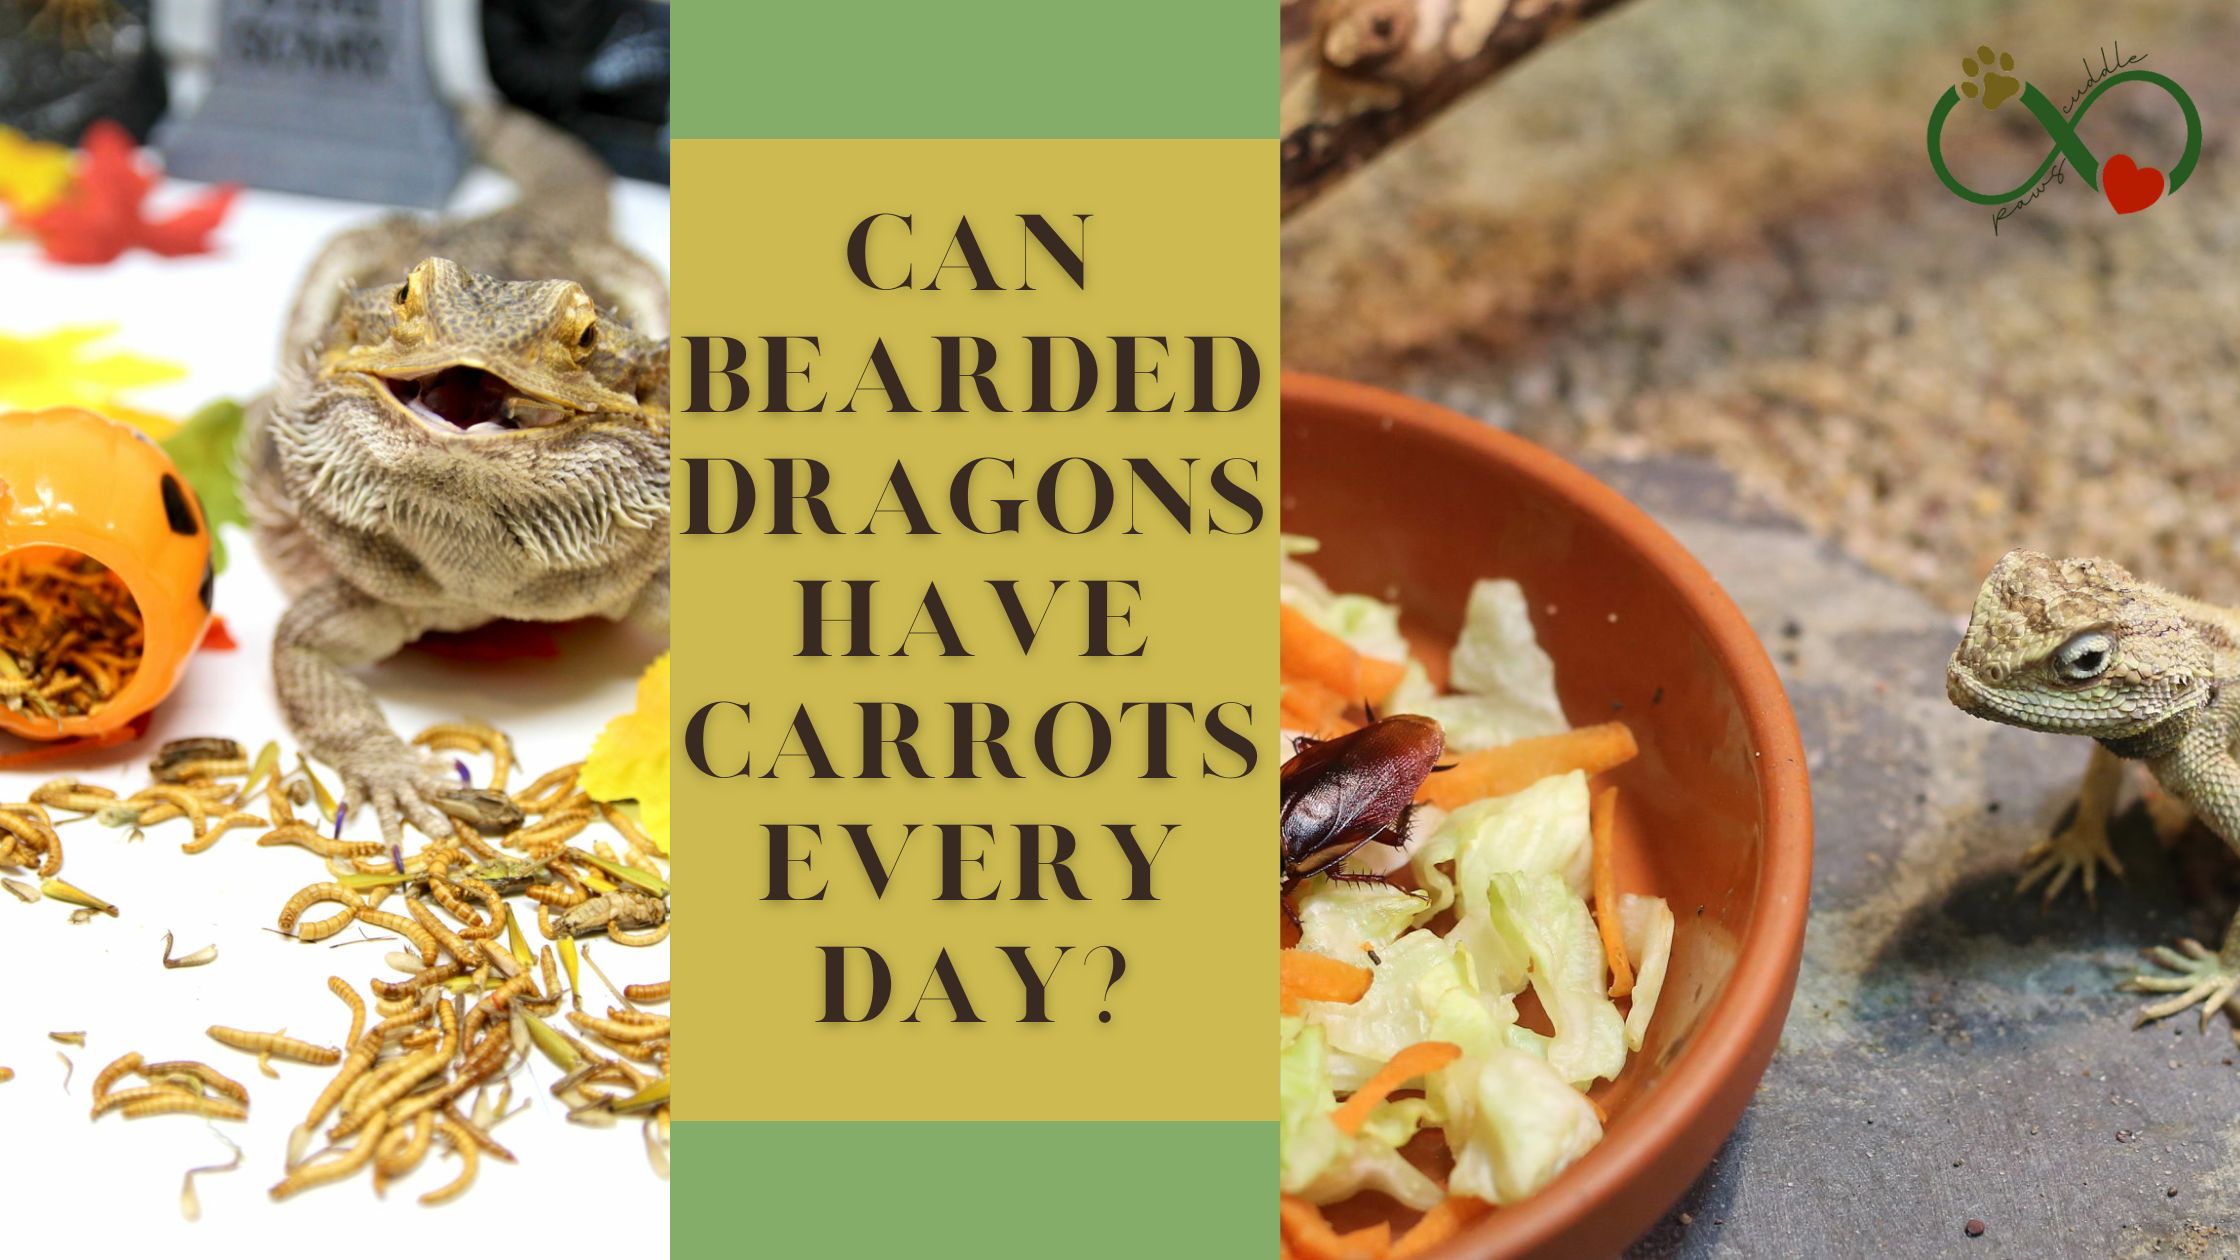 Can bearded dragons have carrots every day?